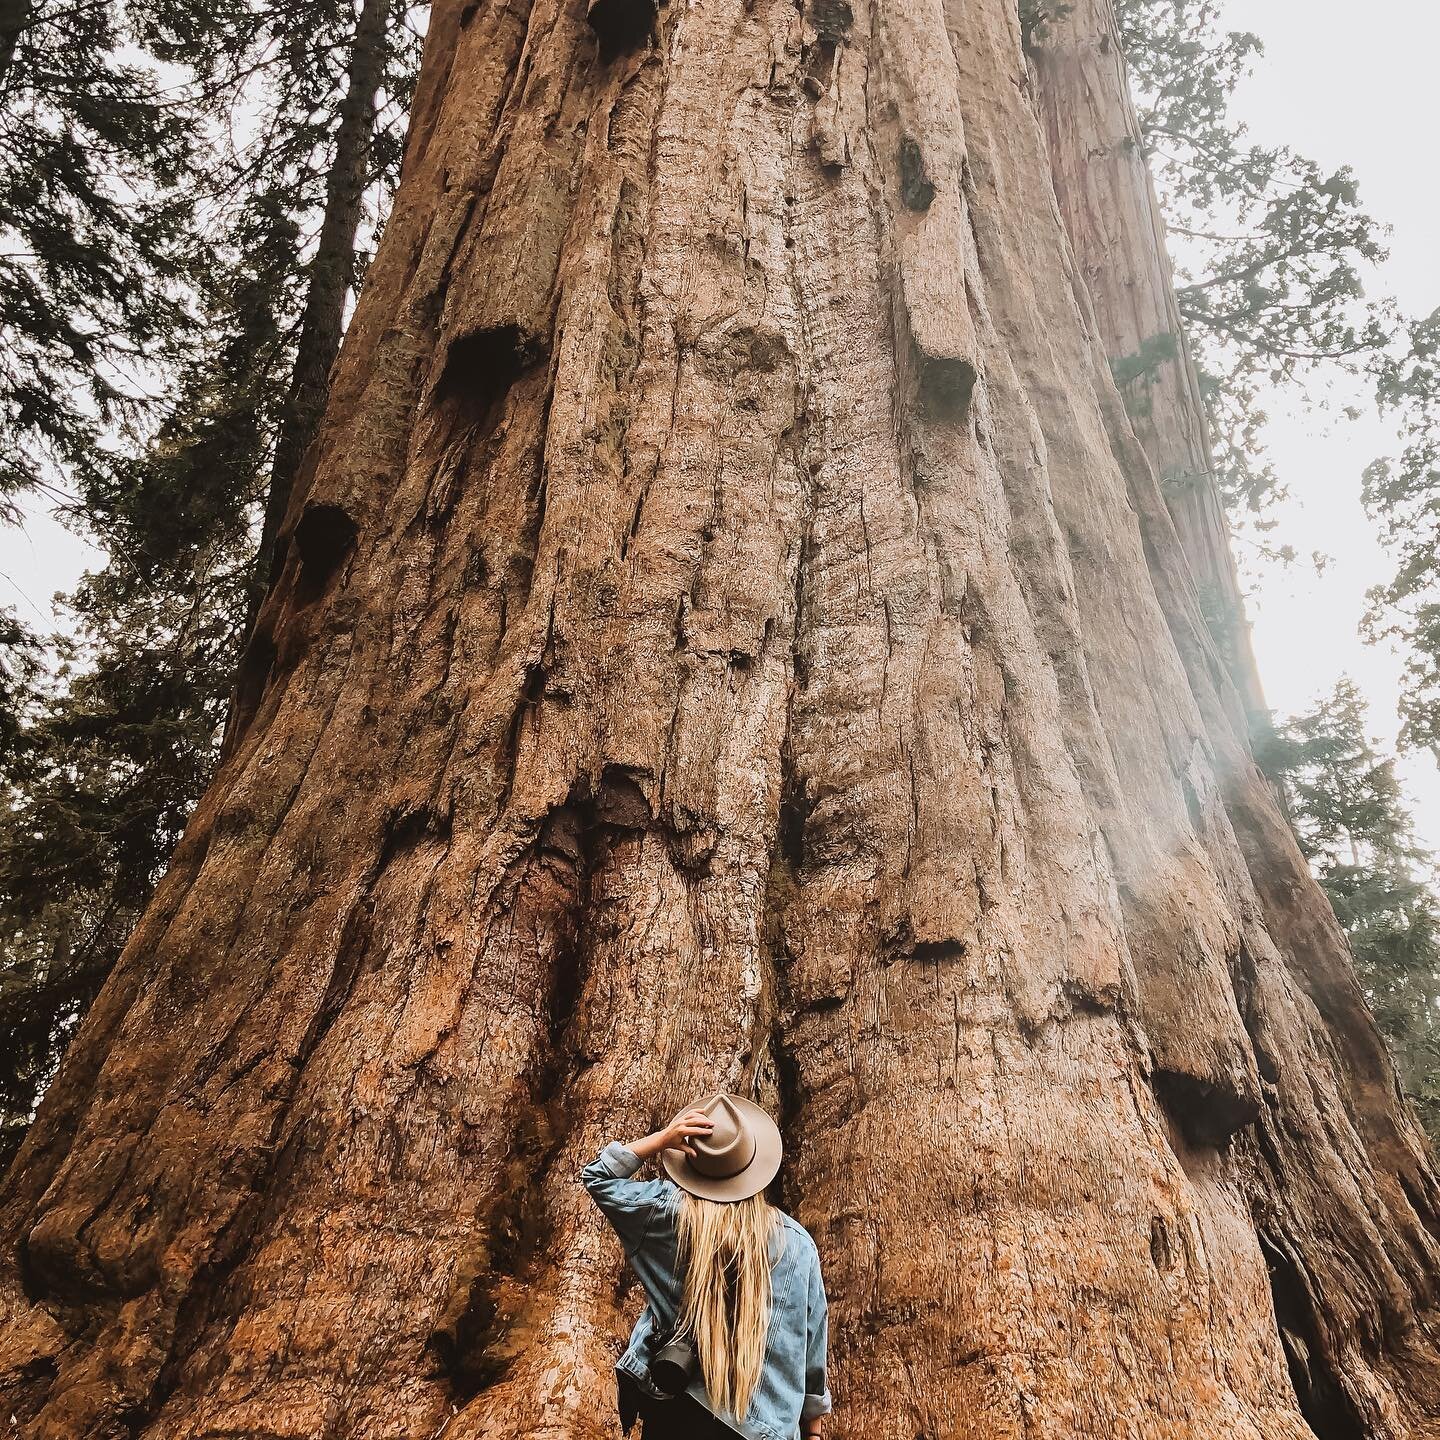 Currently making a Redwood National Park Location List for one of my couples 🌲

These big, beautiful trees really blow my mind. They remind you of how small you &amp; your problems really are. Such a special &amp; unique experience to see these beas